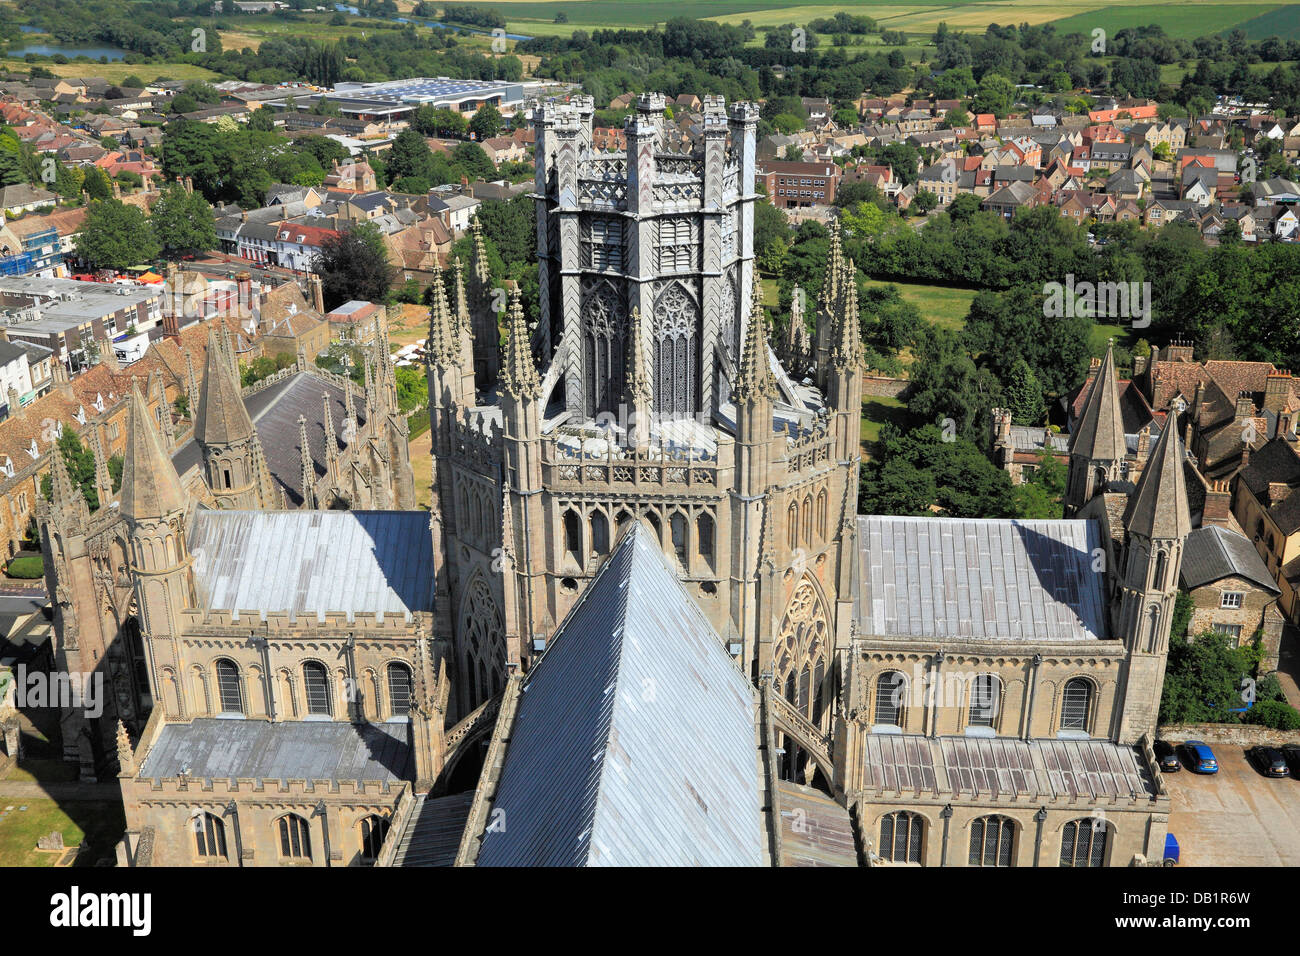 Ely Cathedral, Octagon tower, lantern nave roof and City, from West Tower, Cambridgeshire England UK English medieval cathedrals Stock Photo